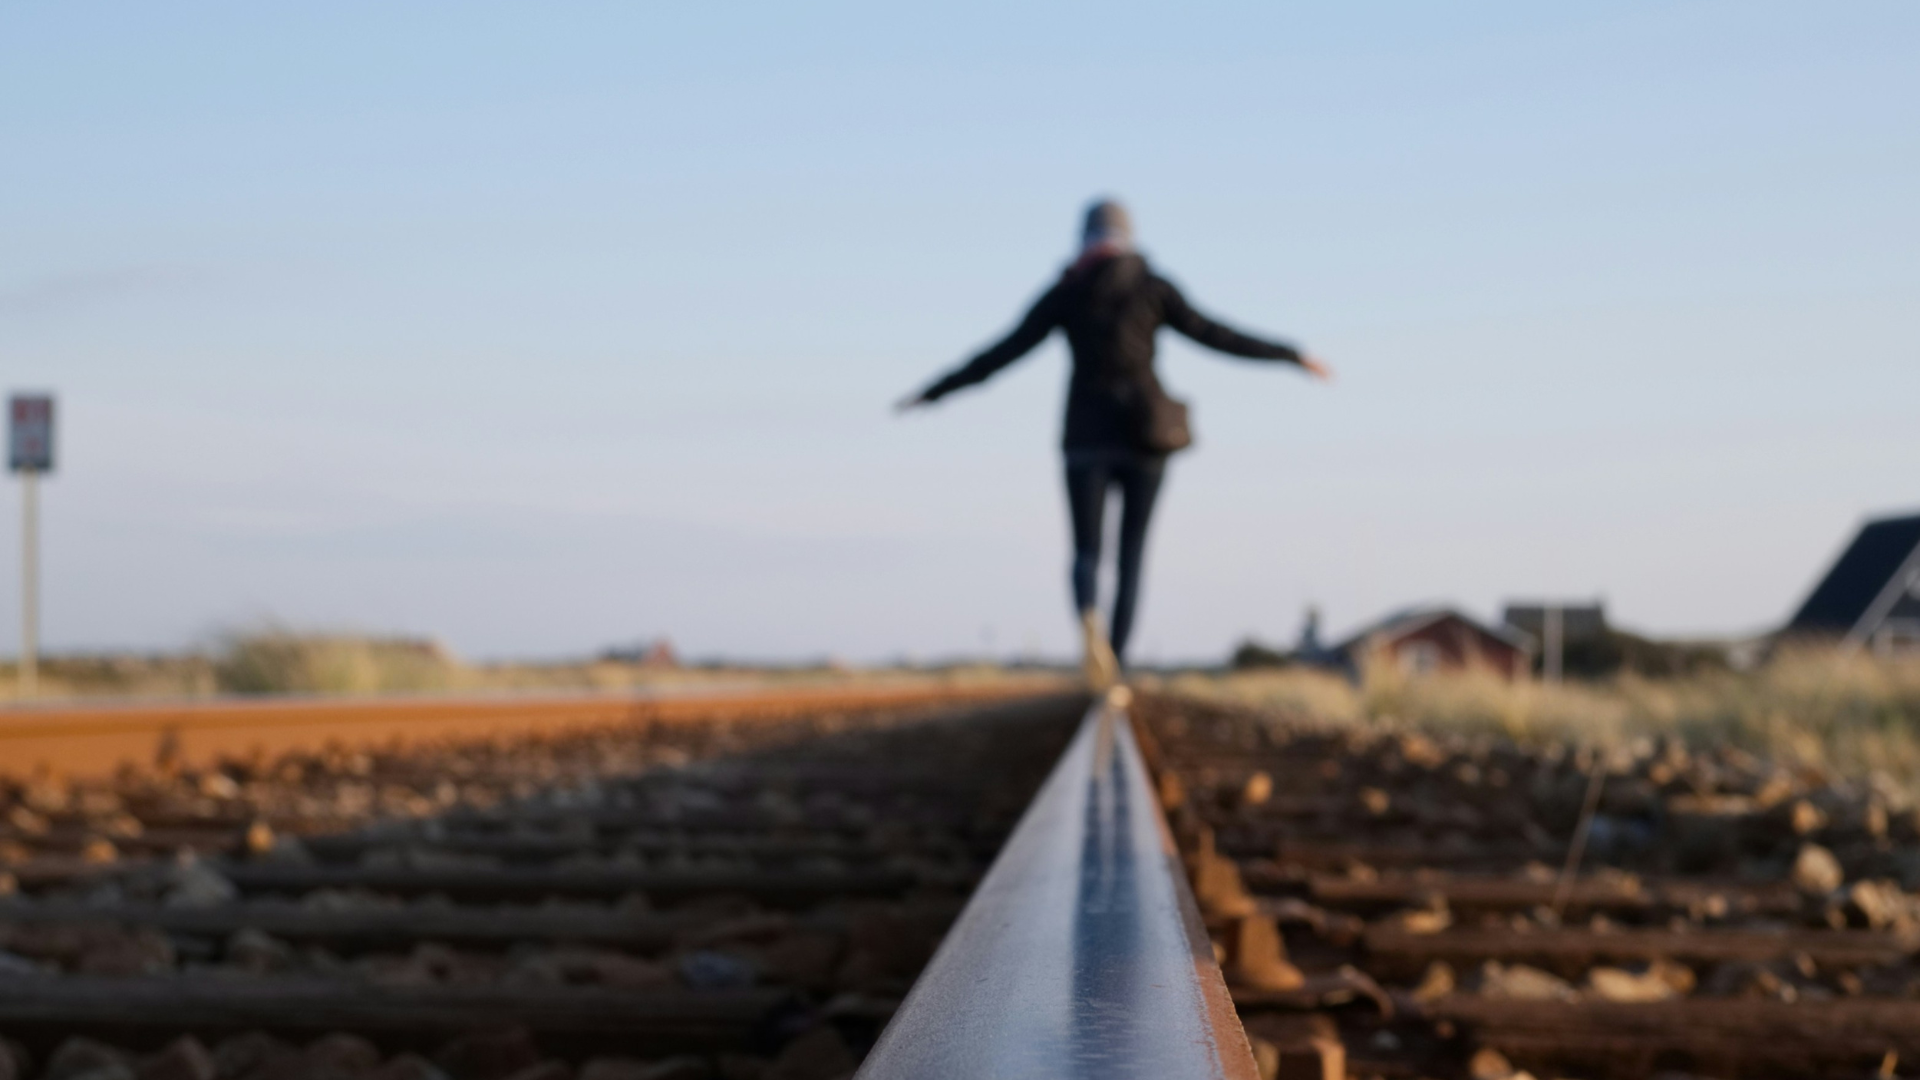 A slightly out of focus figure of a person in the distance with arms stretched out left and right to balance while walking along a single steel rail of a railroad track